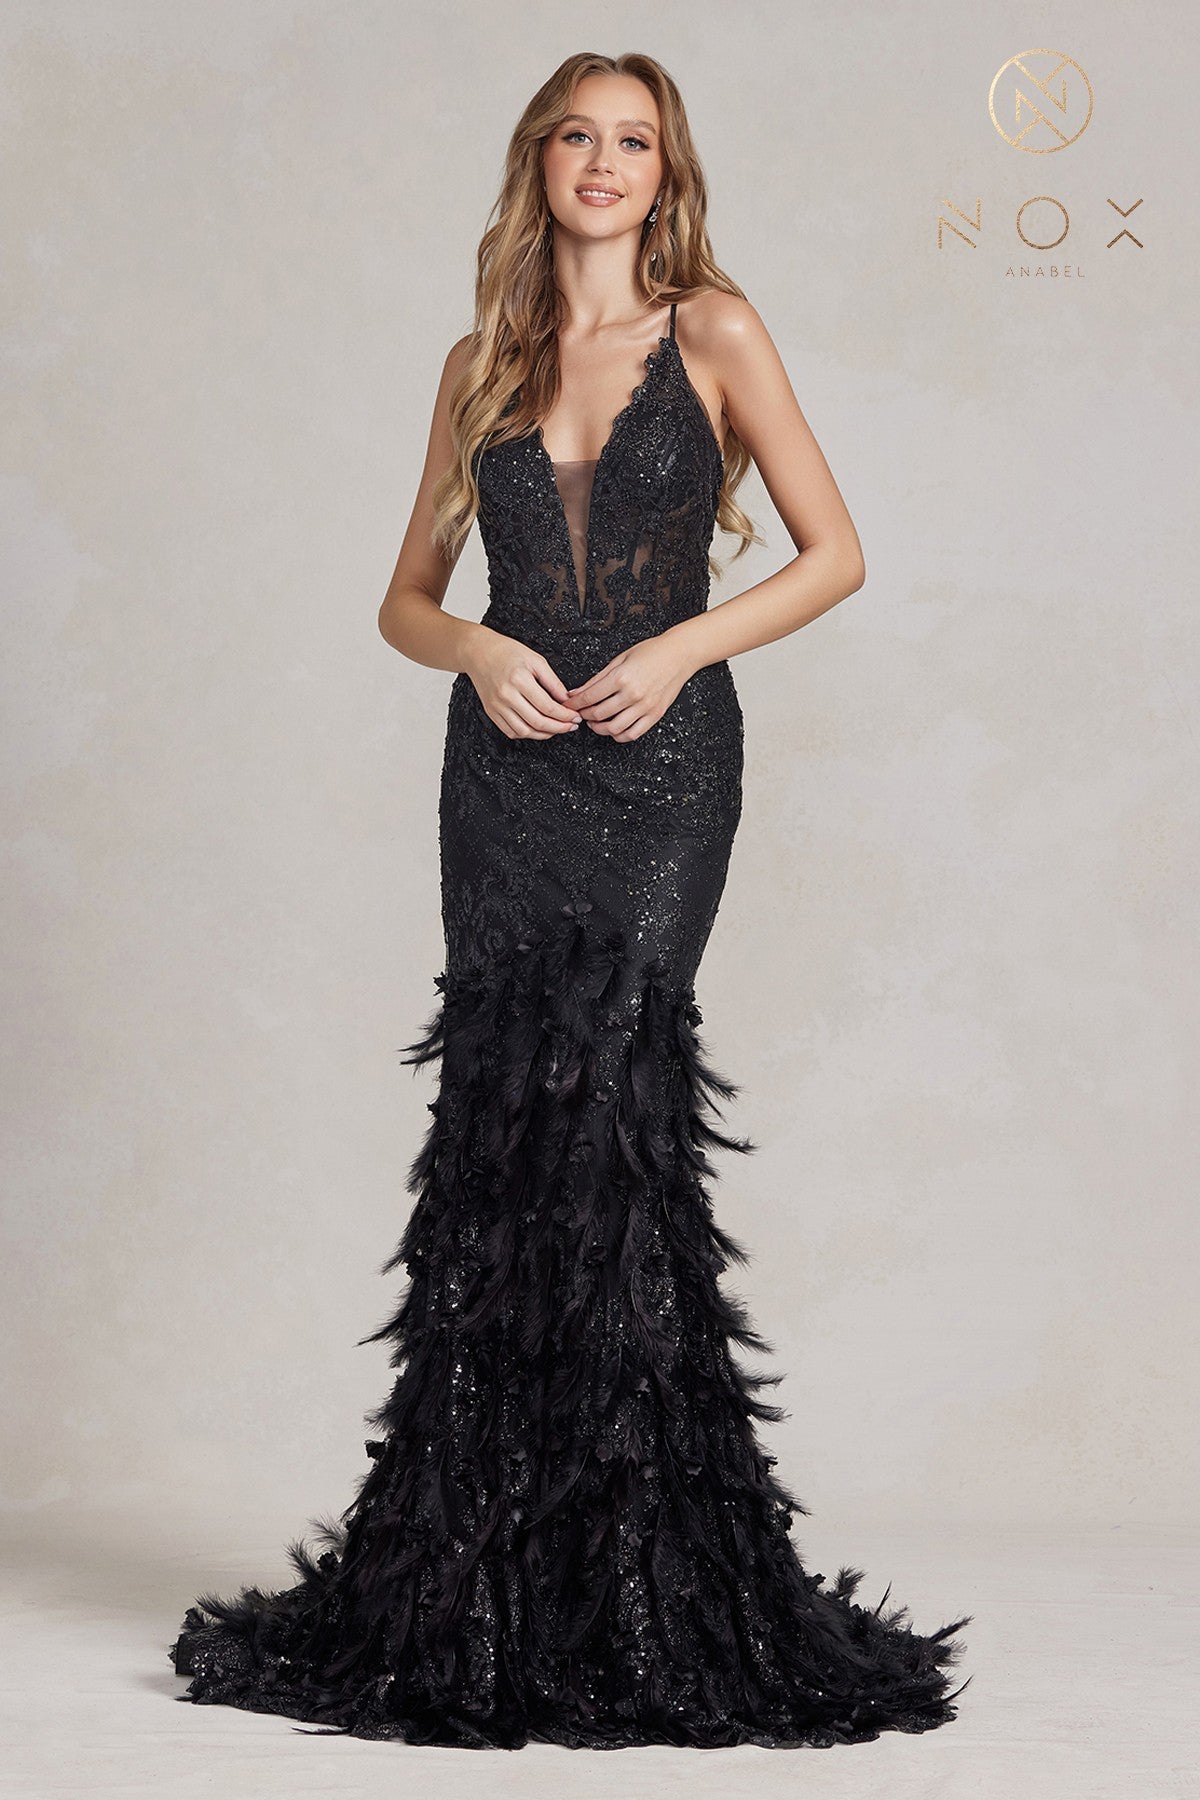 Nox Anabel C1111 Long Sheer Bodice with plunging neckline, Glitter 3D Lace embellished Feather Mermaid Skirt with train. Prom Dress Formal Evening Gown with corset back.  Sizes: 00-16  Colors: Black, Mauve, Light Blue